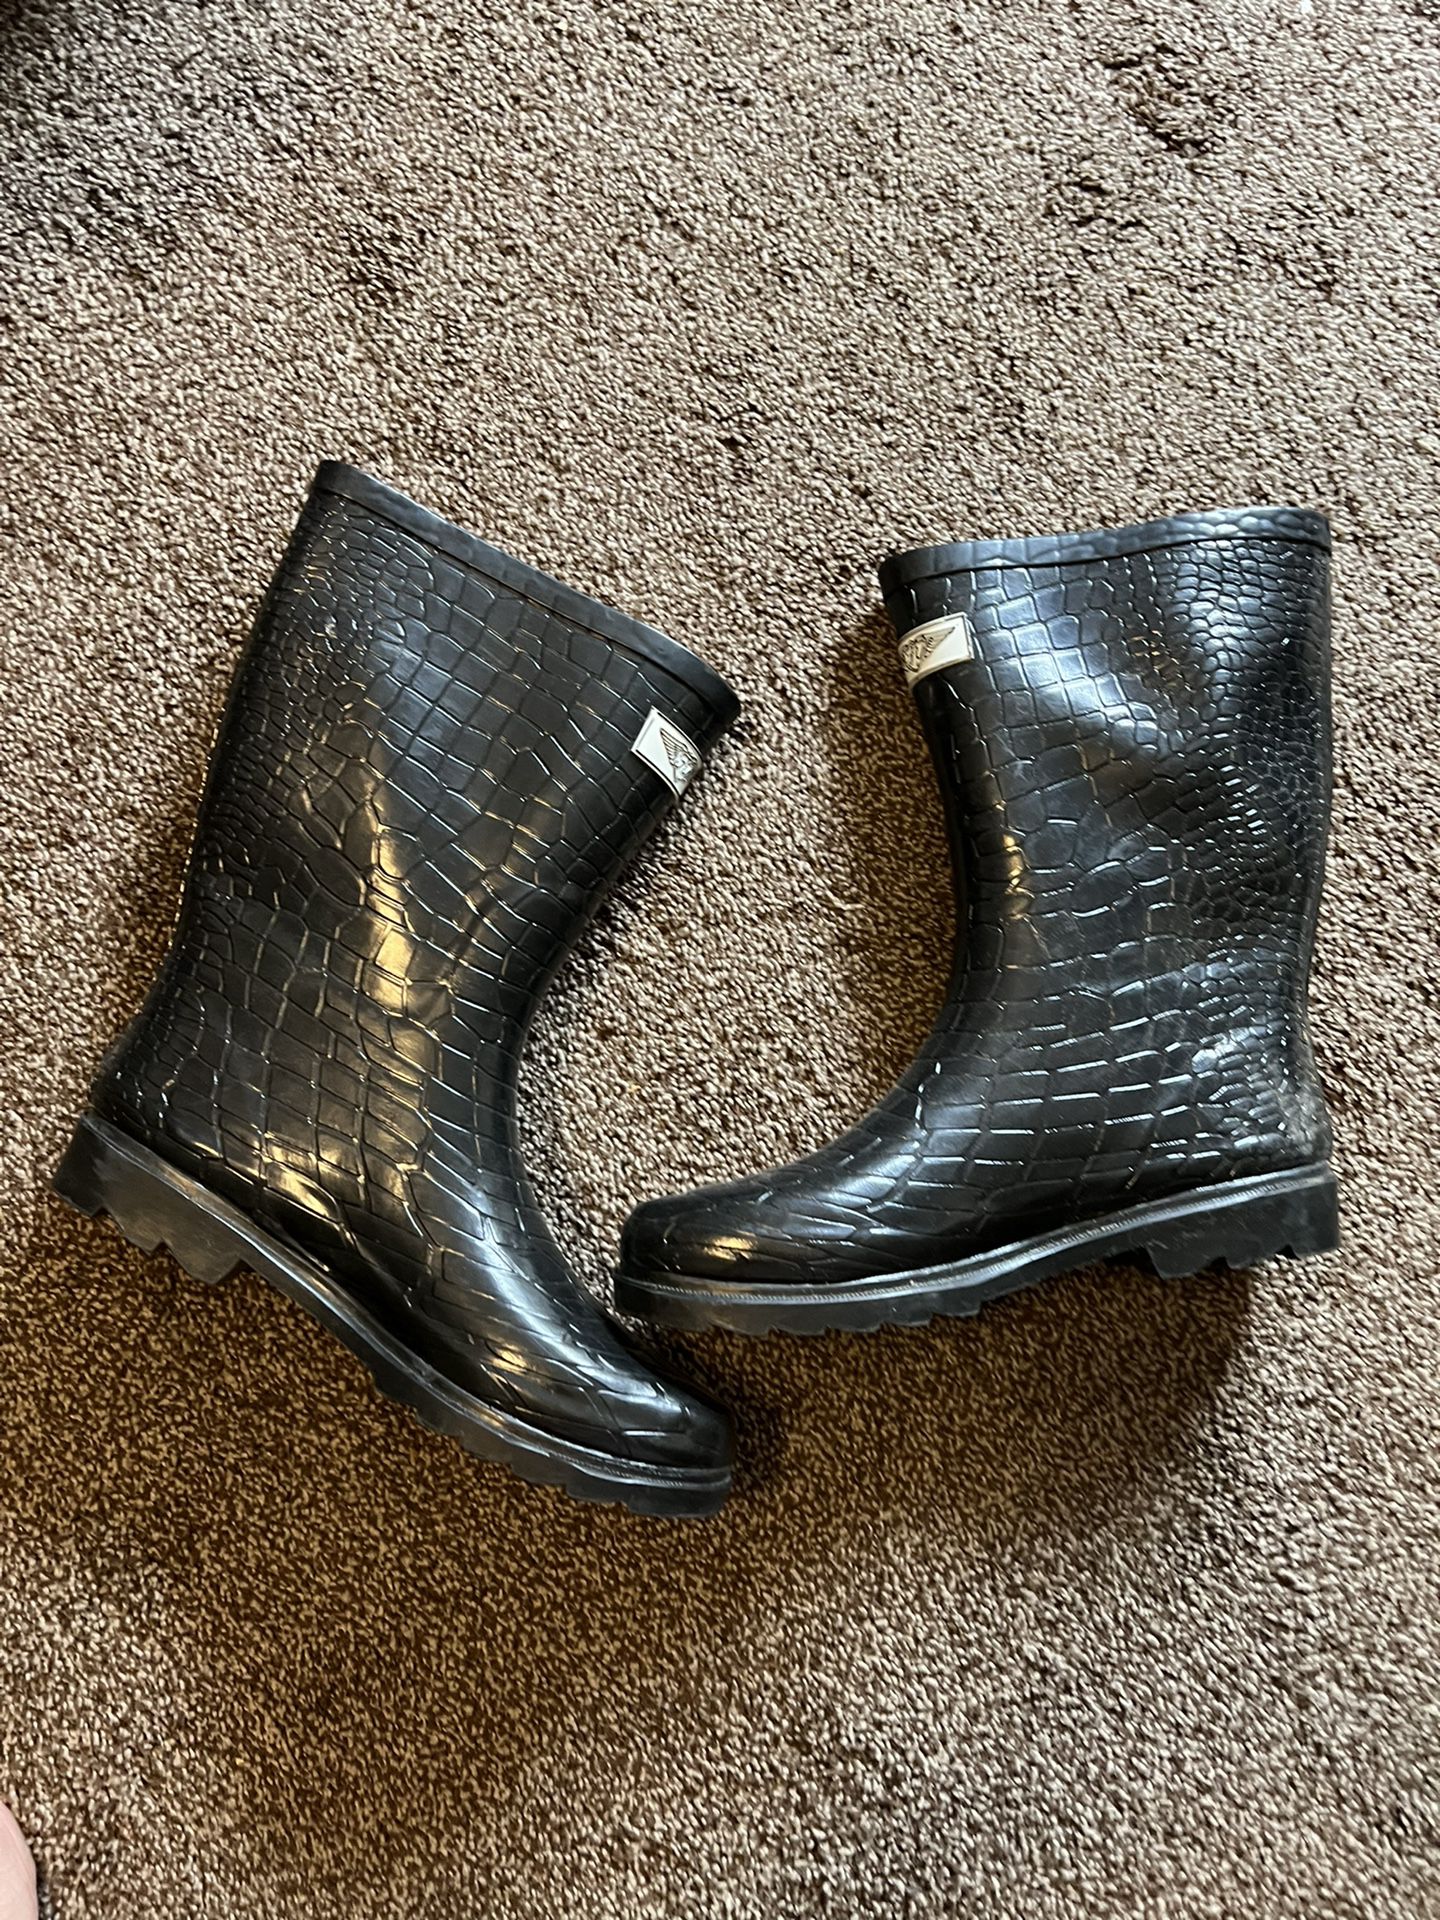 Forever Young Rain Boots - Size 8